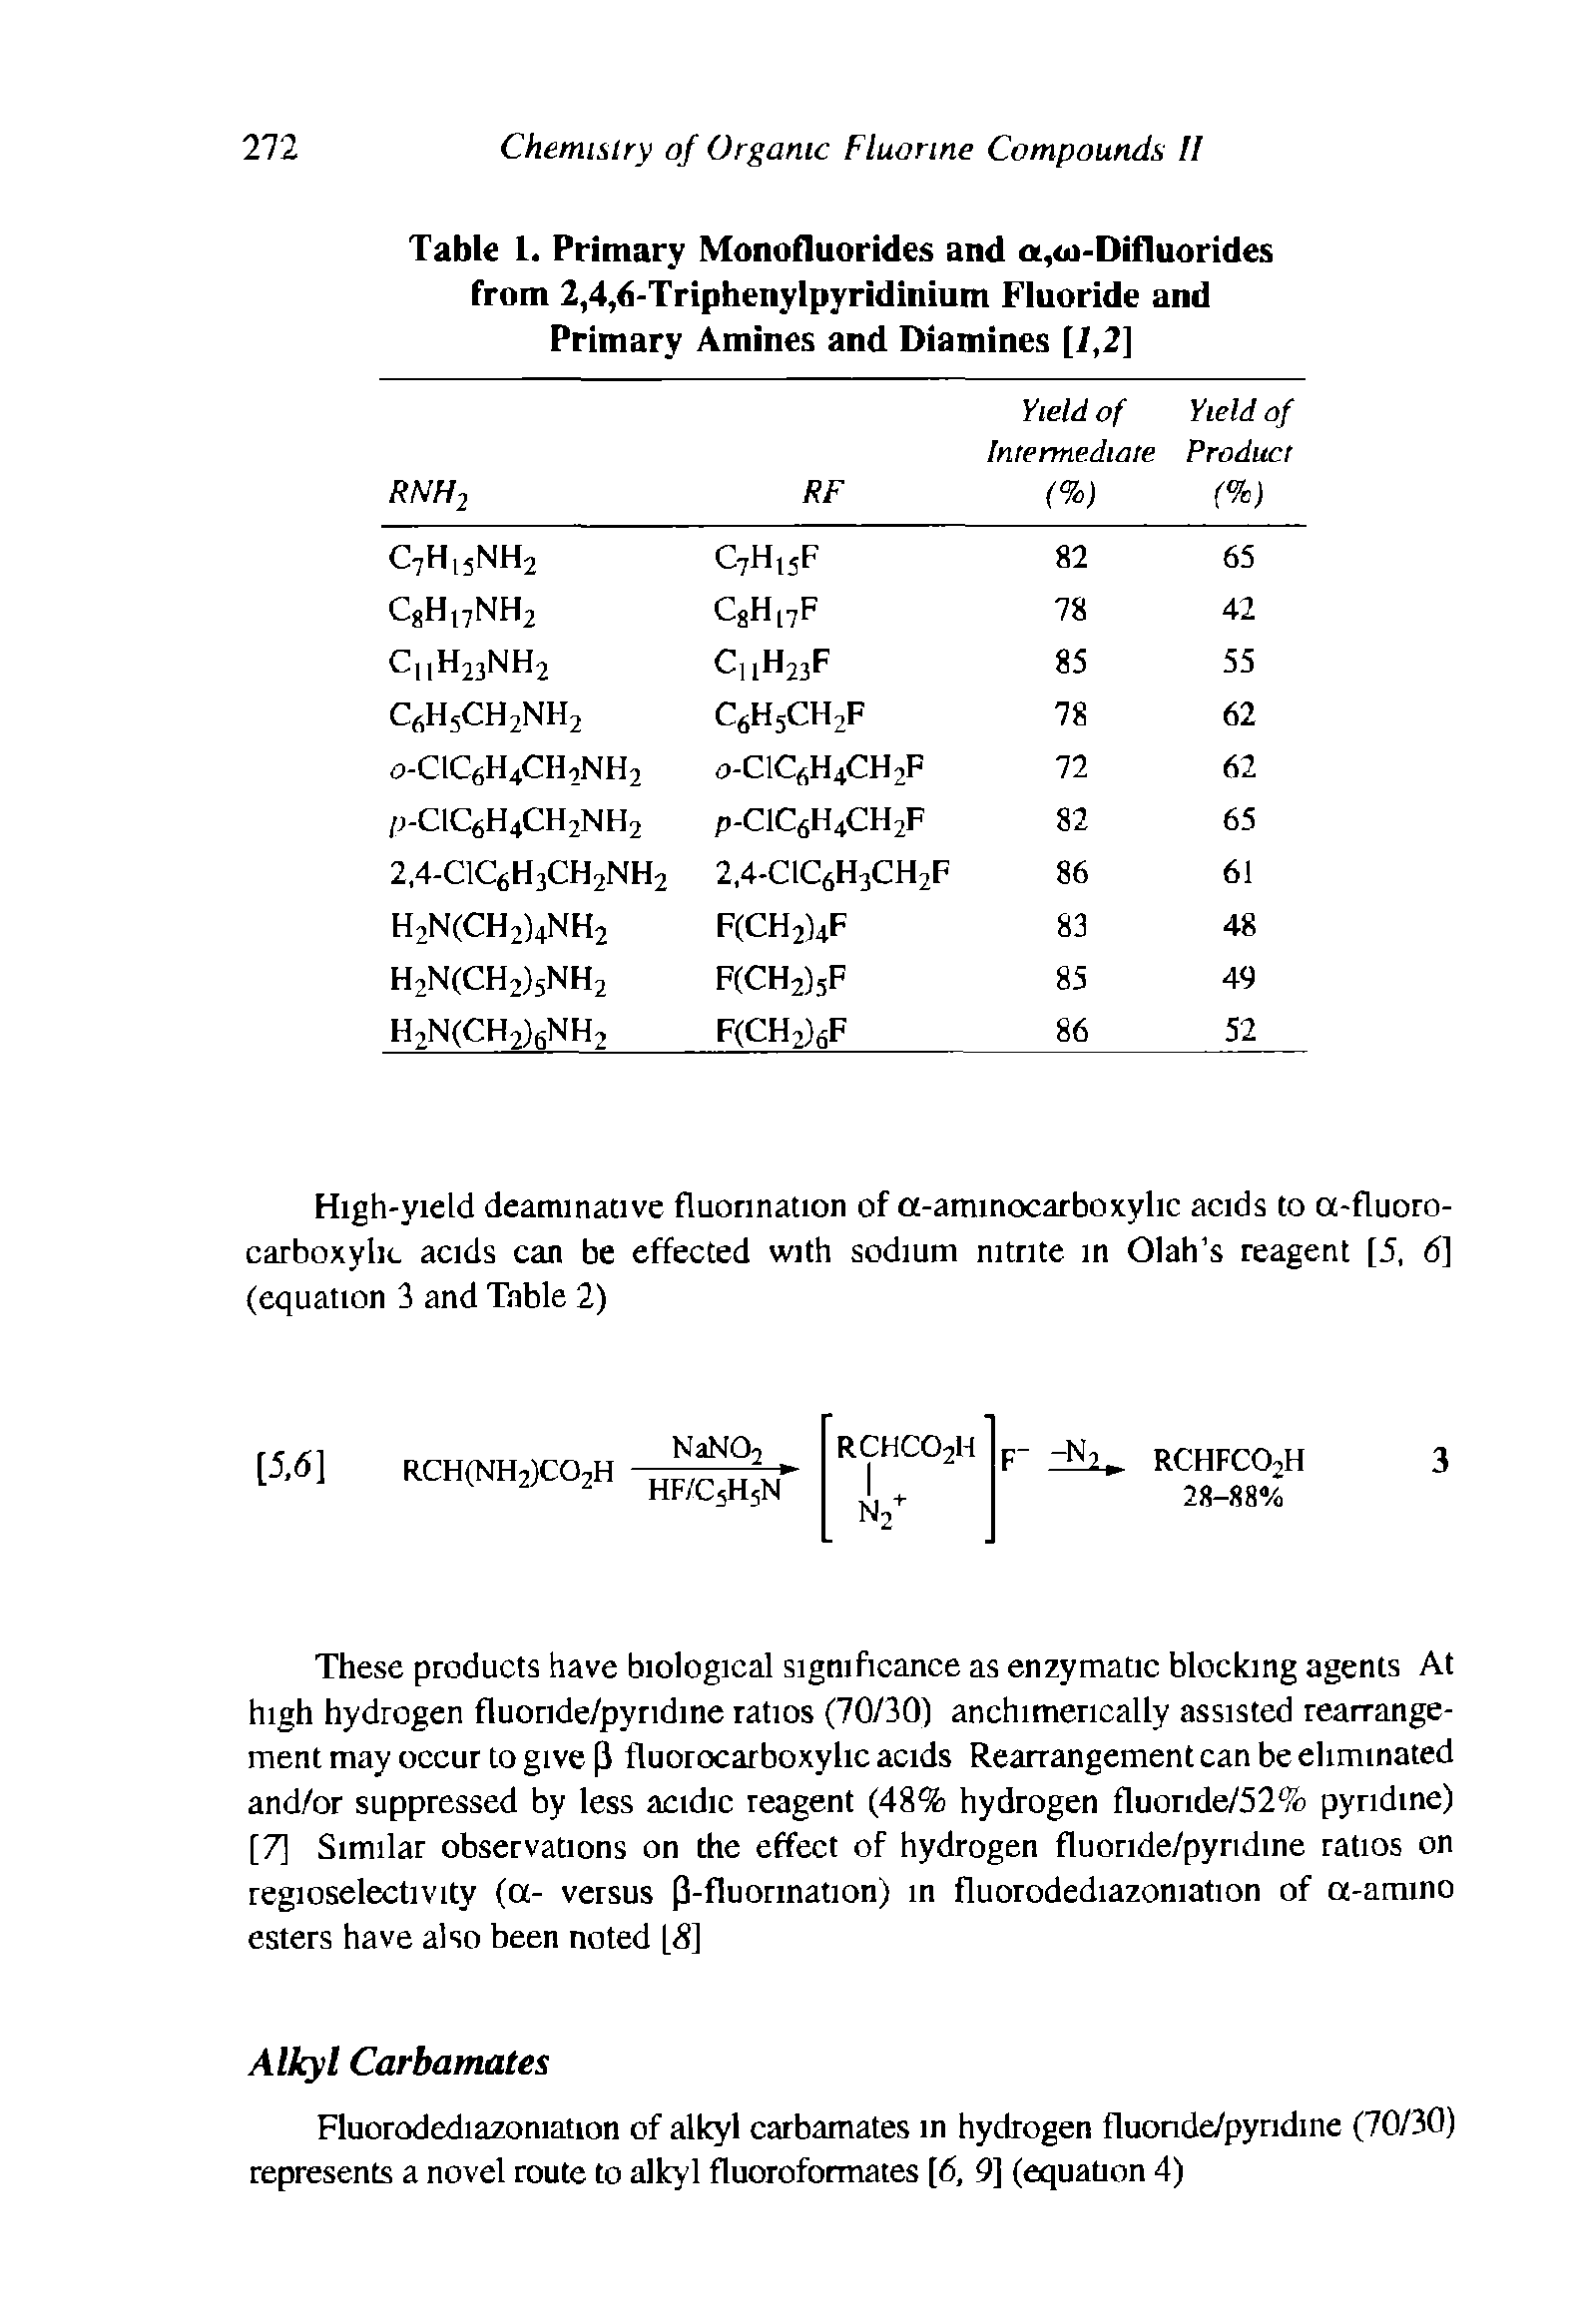 Table 1. Primary Monofluorides and a,oi-Difluorides from 2,4,6-Triphenylpyridinium Fluoride and Primary Amines and Diamines [1,2]...